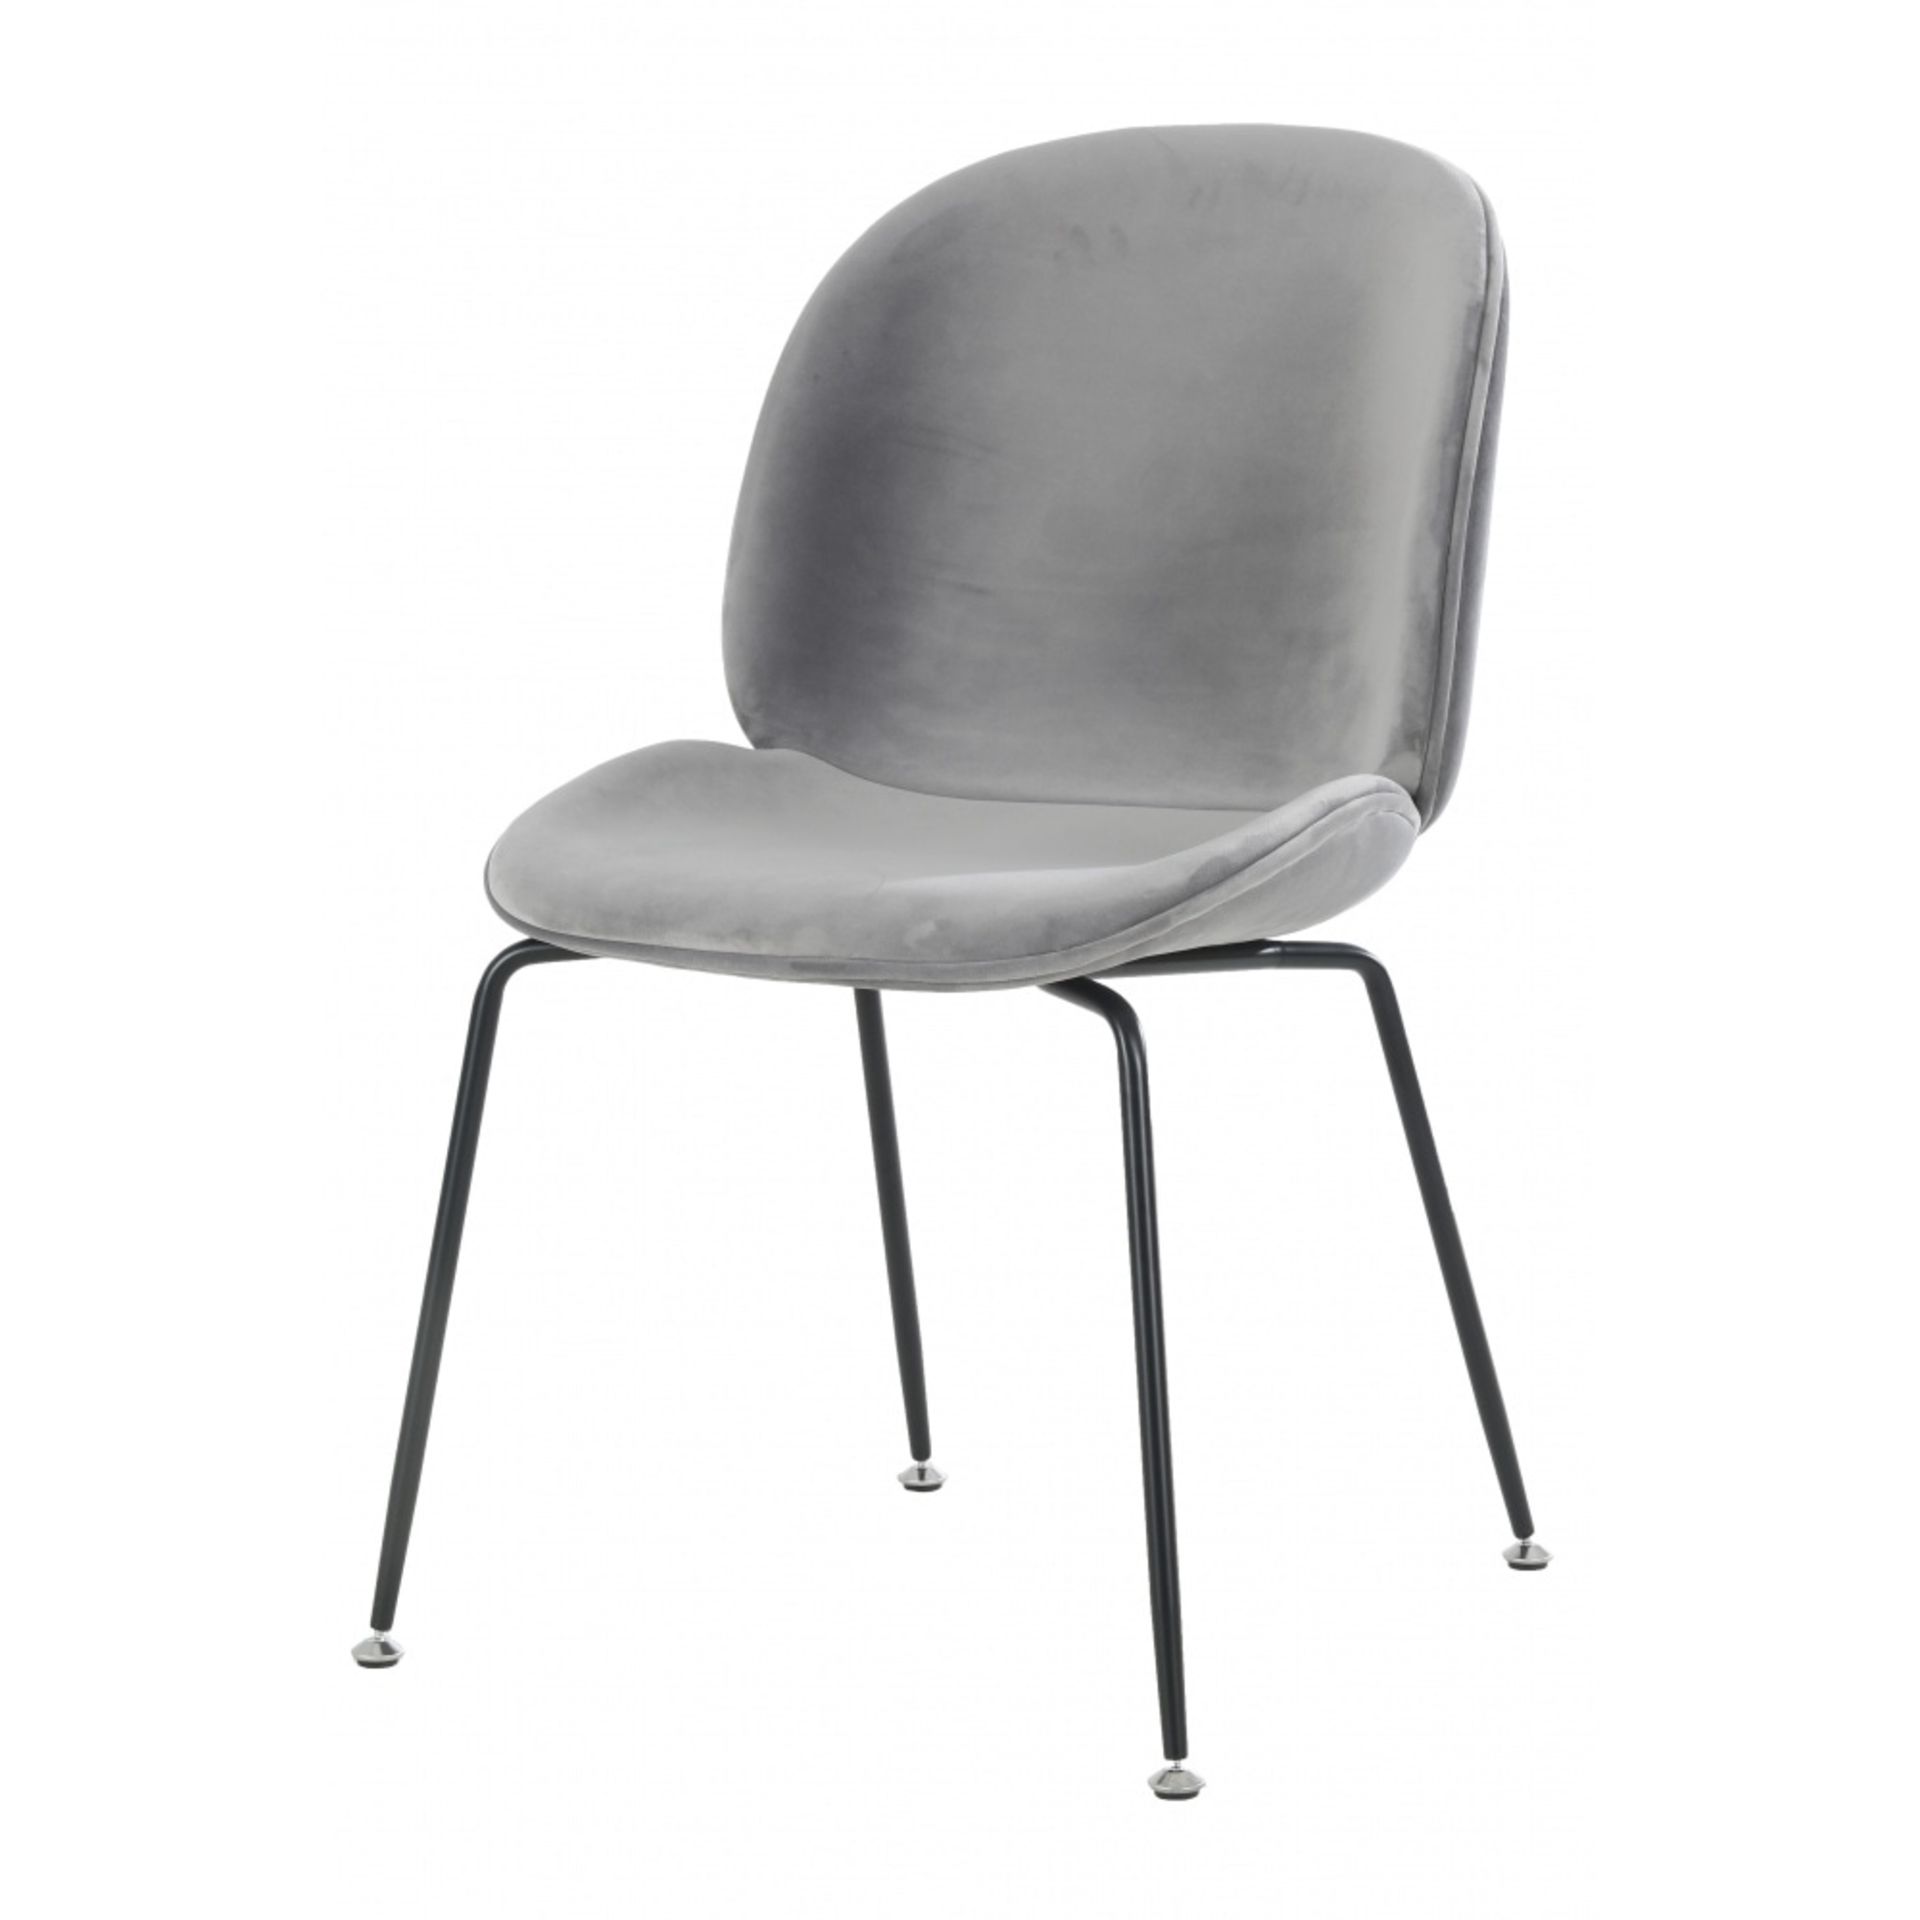 2 x Grace Upholstered Contemporary Dining Chairs in Grey Velvet - New - Image 5 of 6